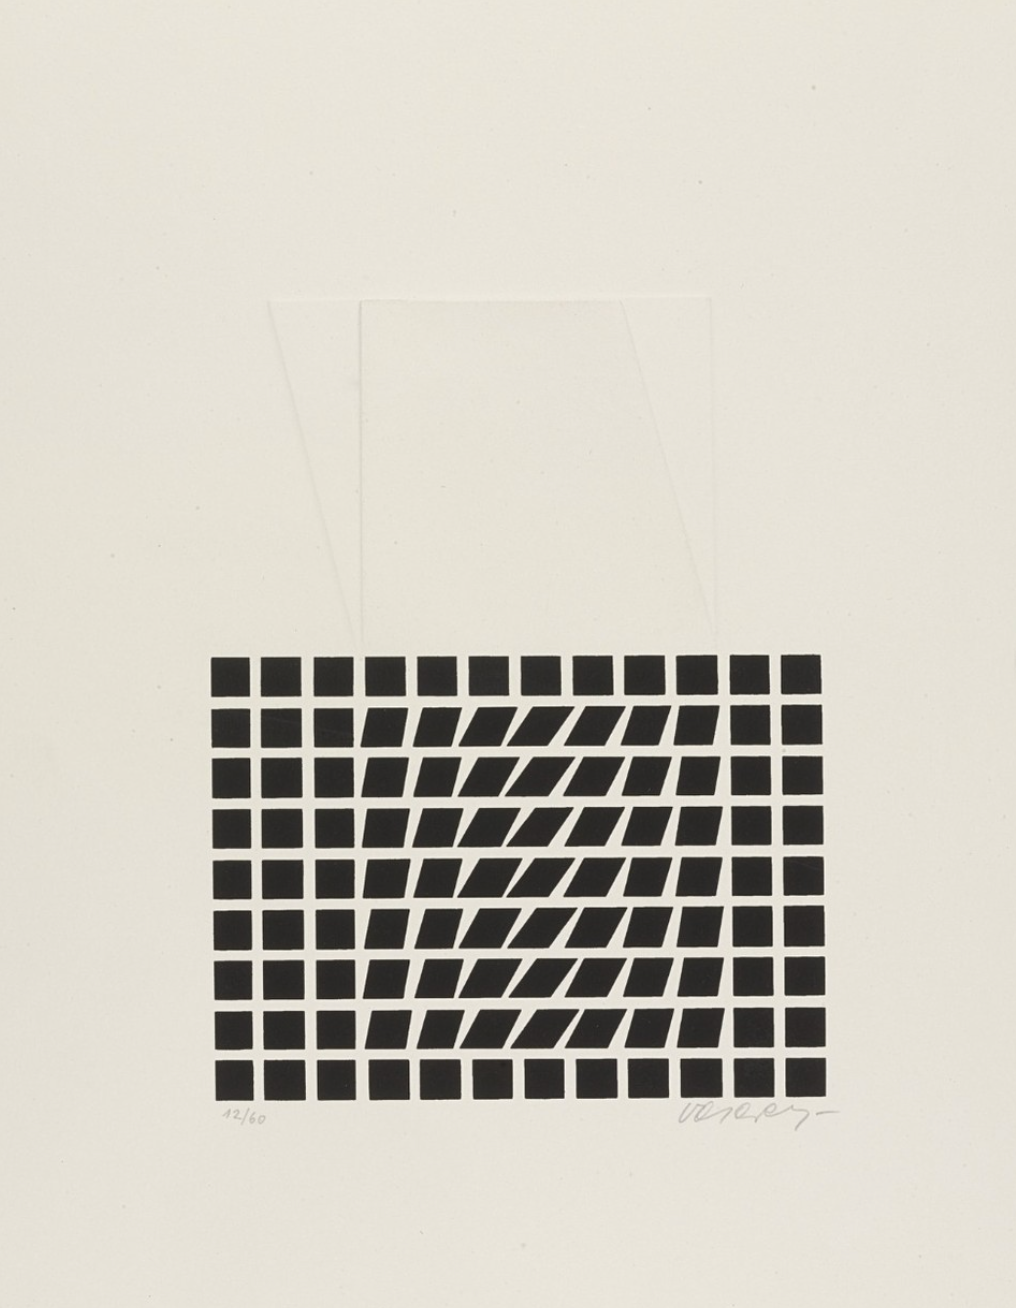 Untitled 1963, Victor Vasarely, courtesy of Tate⁠